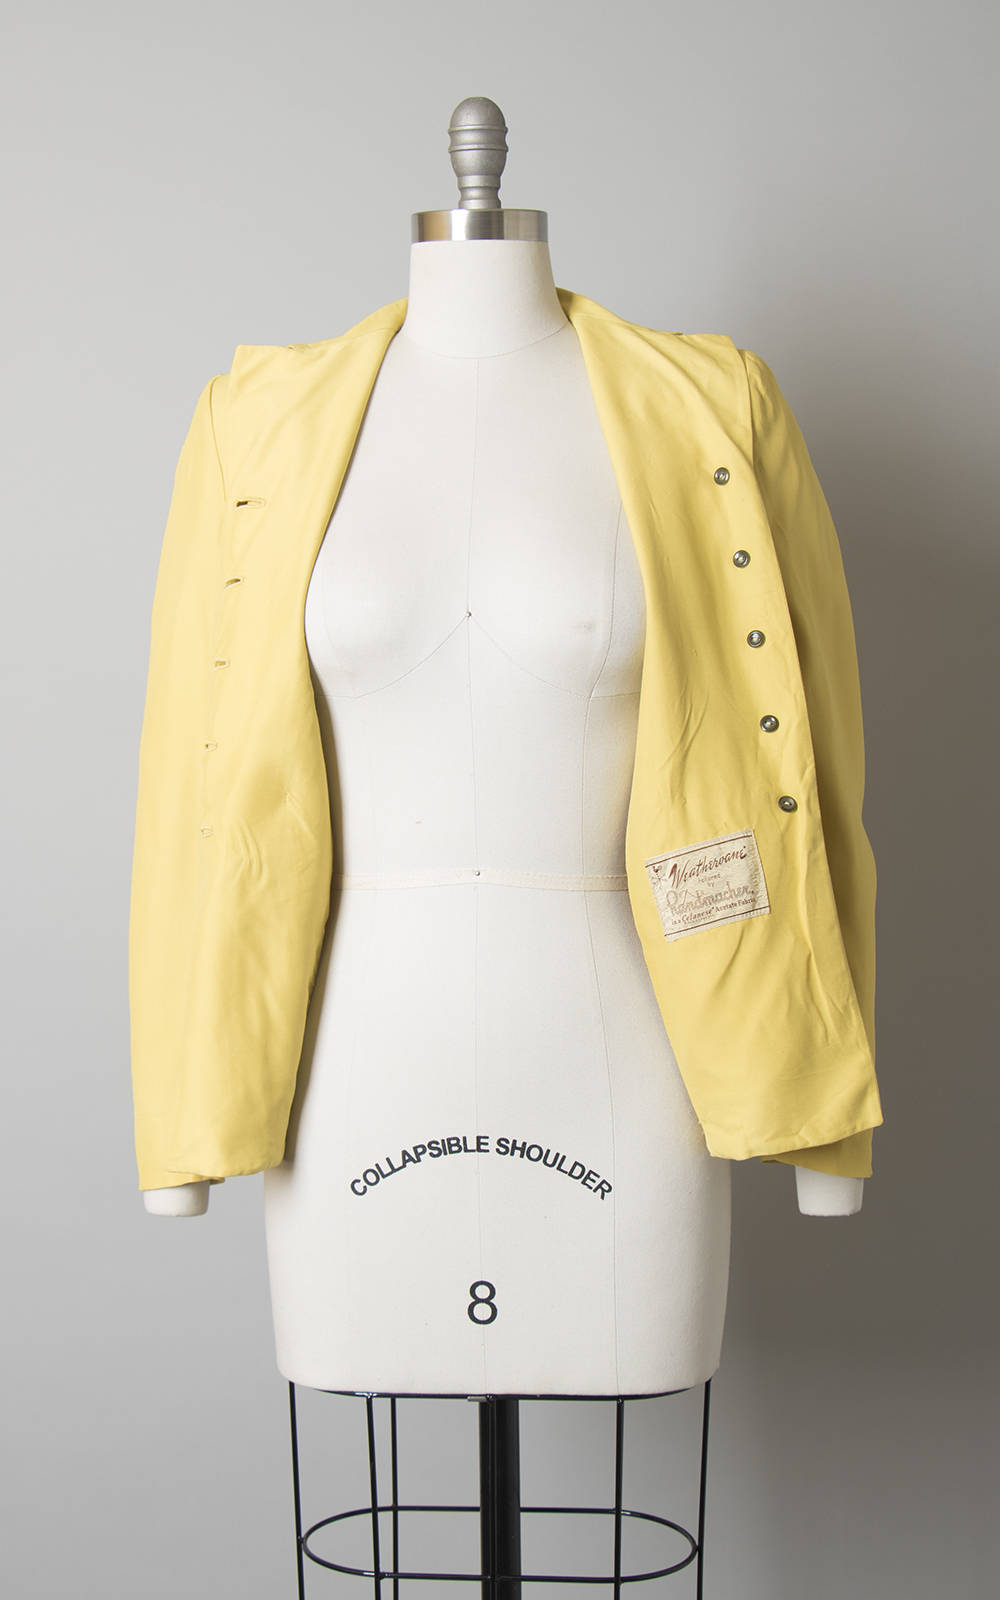 Vintage 1940s Blazer | 40s Yellow Lightweight Tailored Jacket with Mother of Pearl Shell Buttons (small)